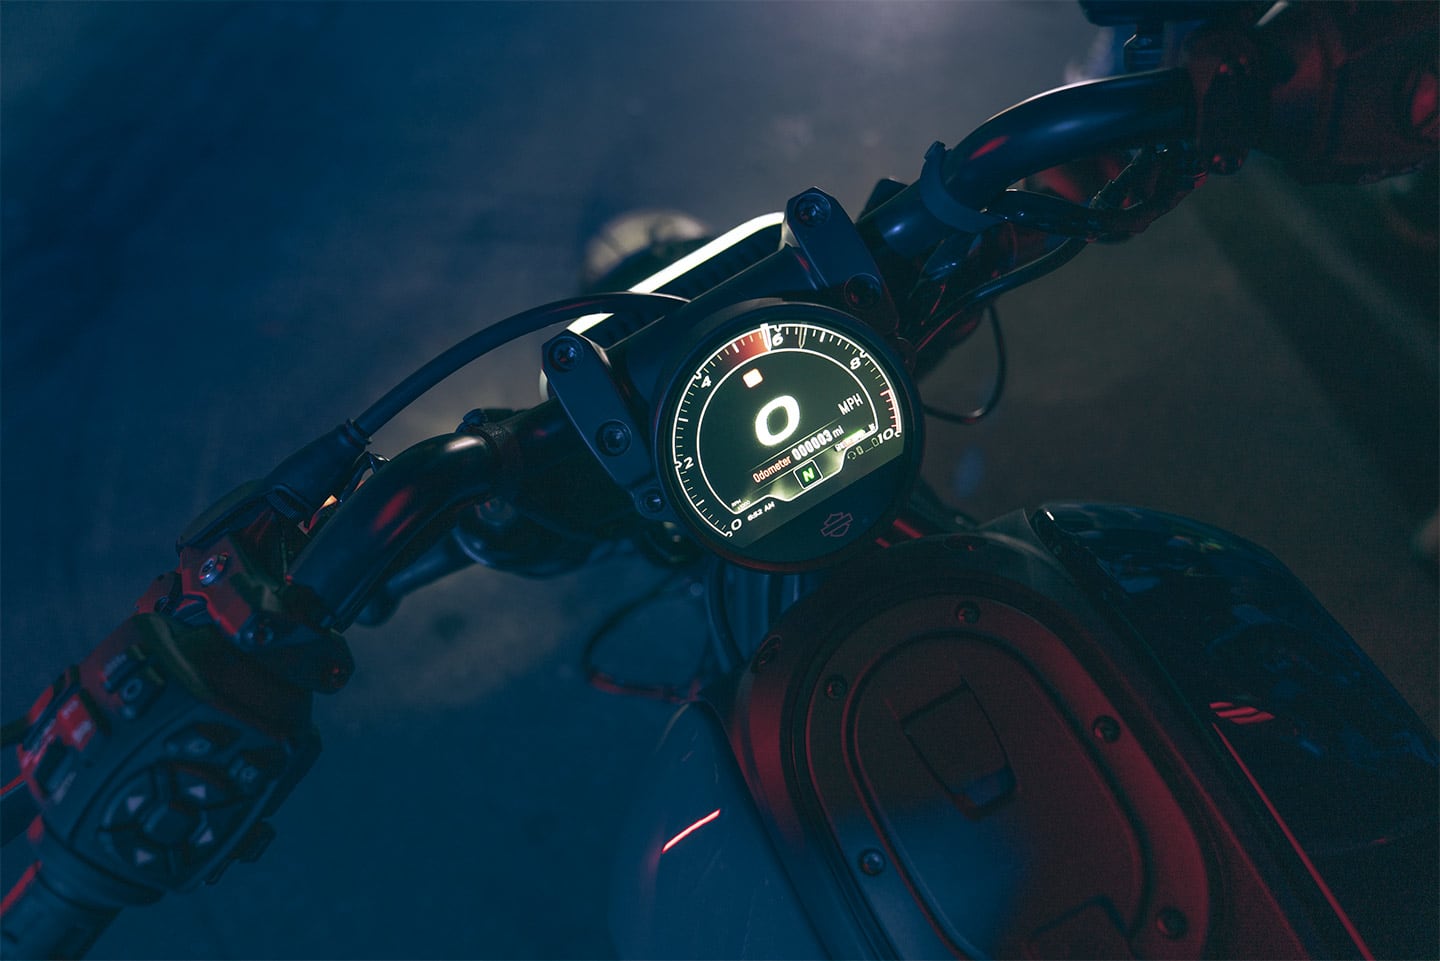 The round TFT dash fits the style of the bike and makes it far easier to navigate menus than a more traditional LCD setup would.